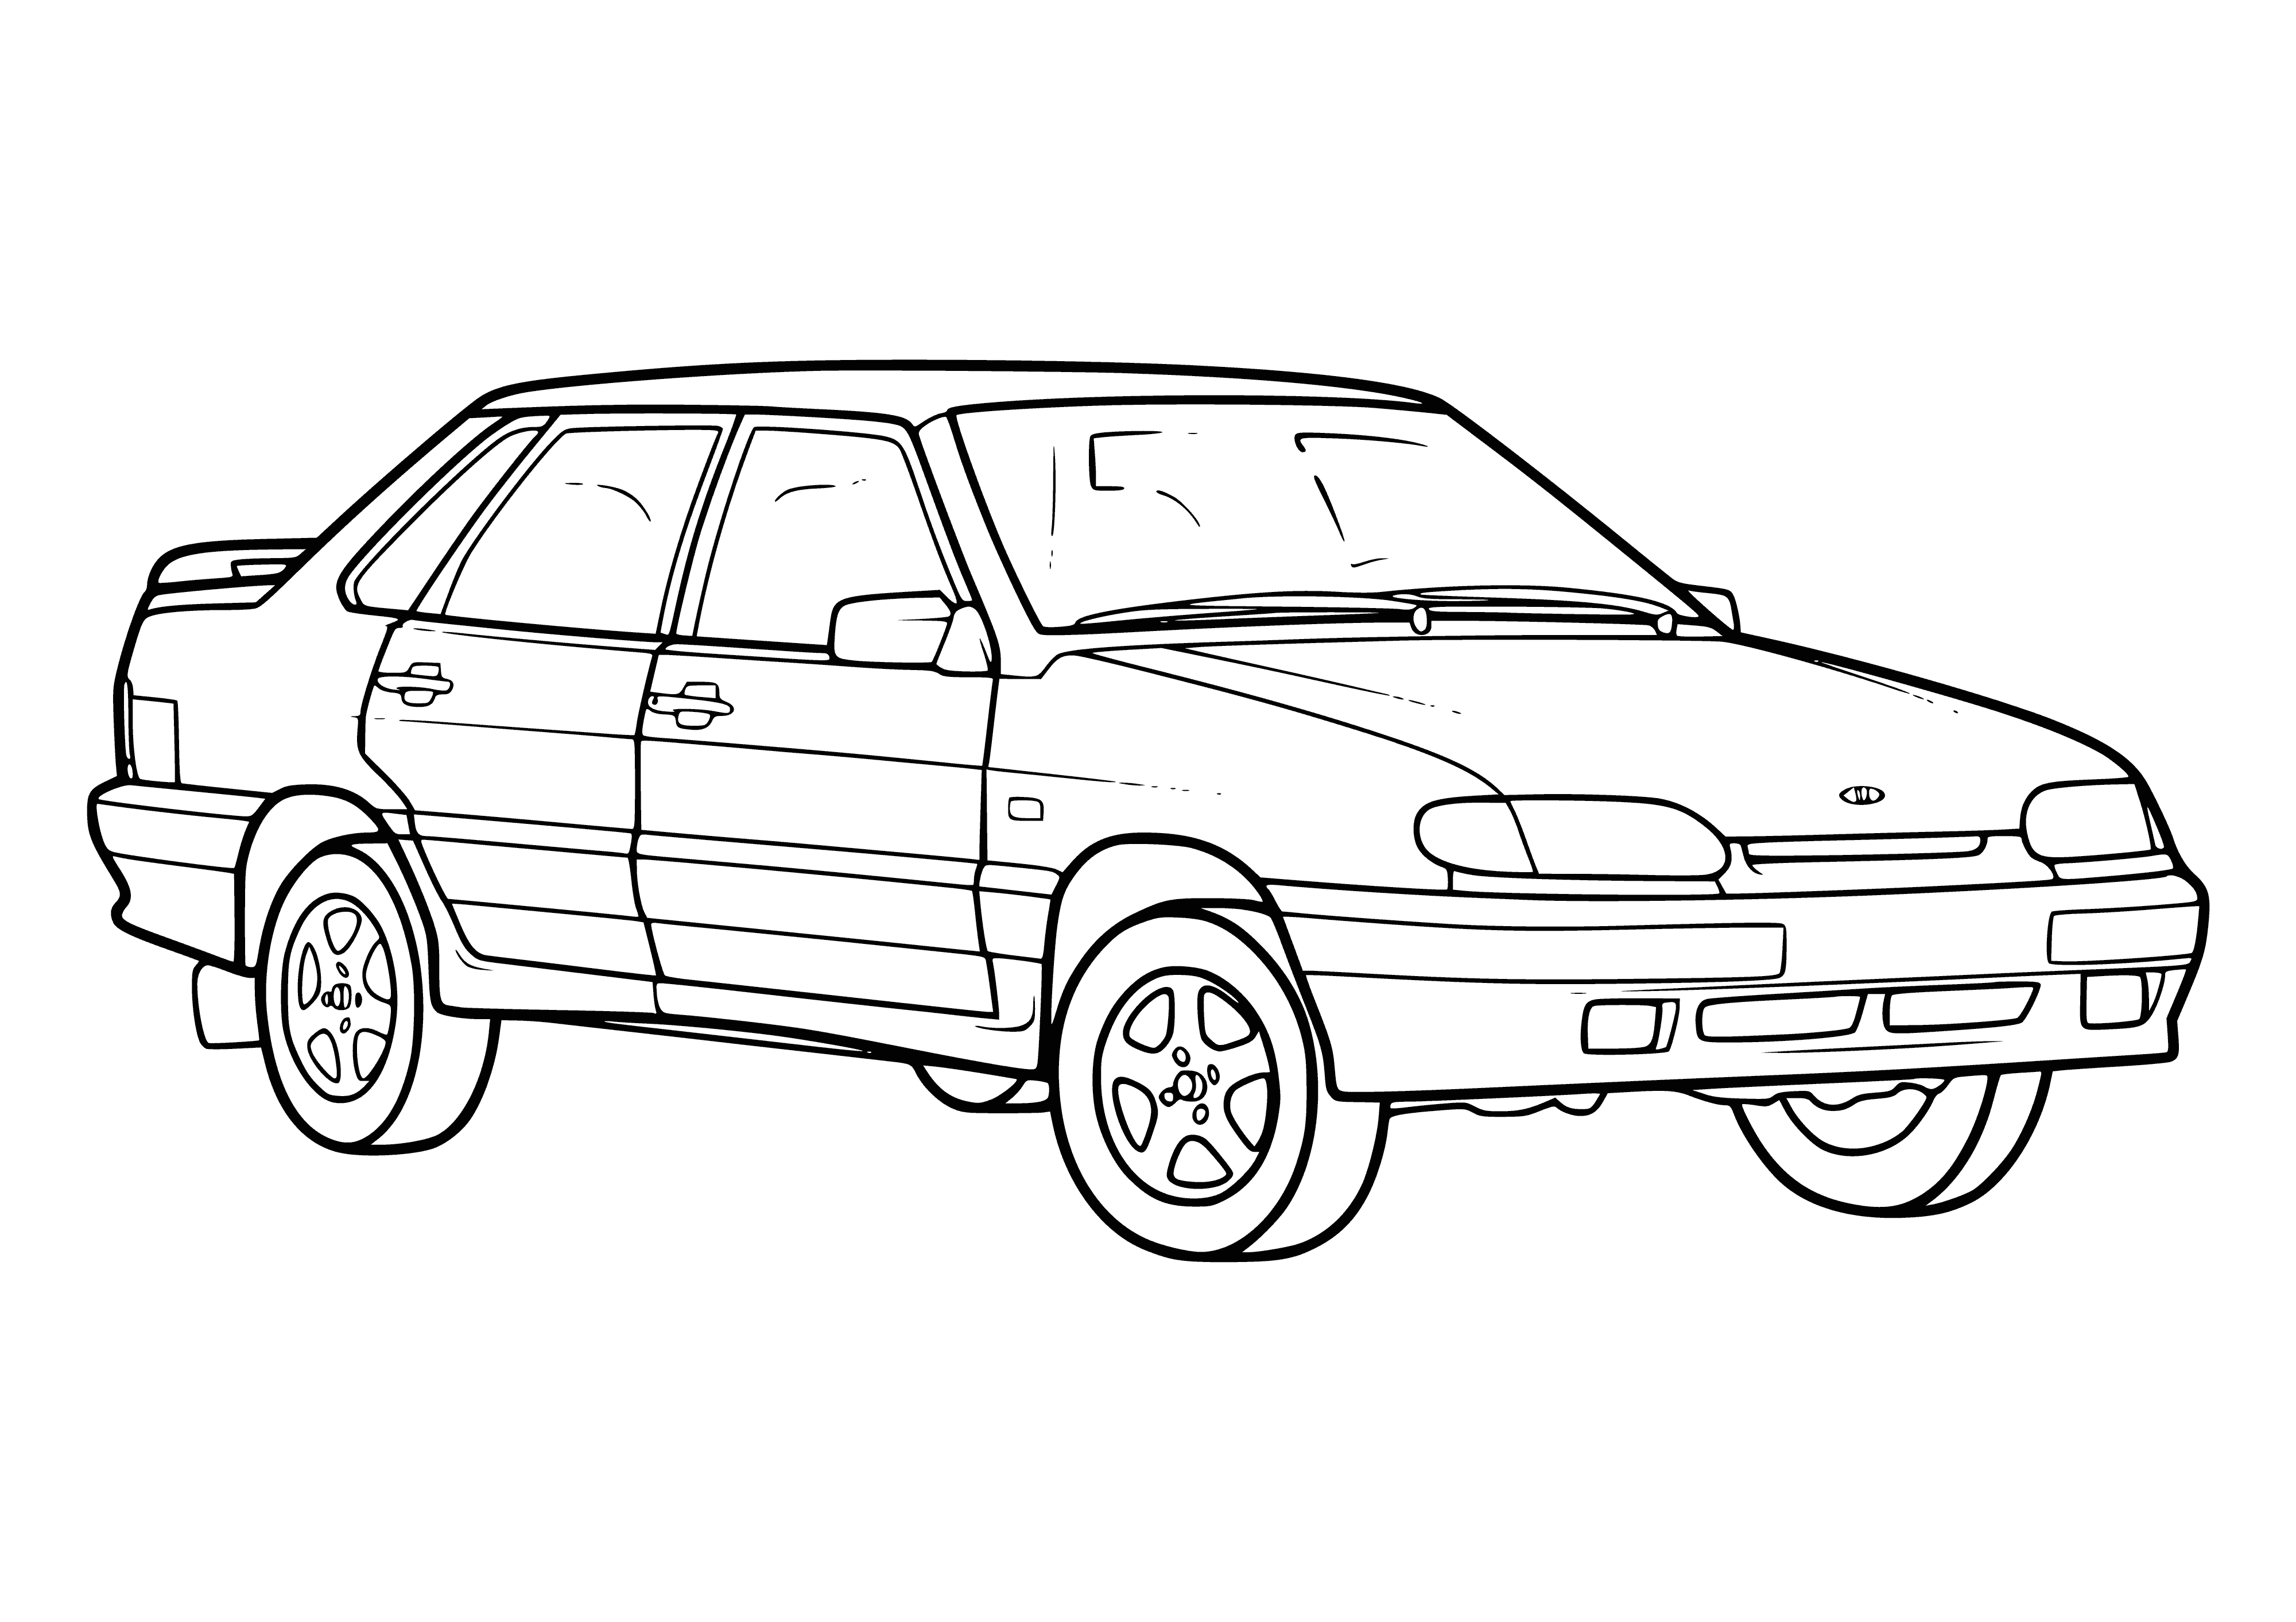 coloring page: Lada car has 4 doors & magenta body w/black trim. 4 rectangular headlights, grille w/logo & 3 windows/side, square taillights & 4 exhaust tips.